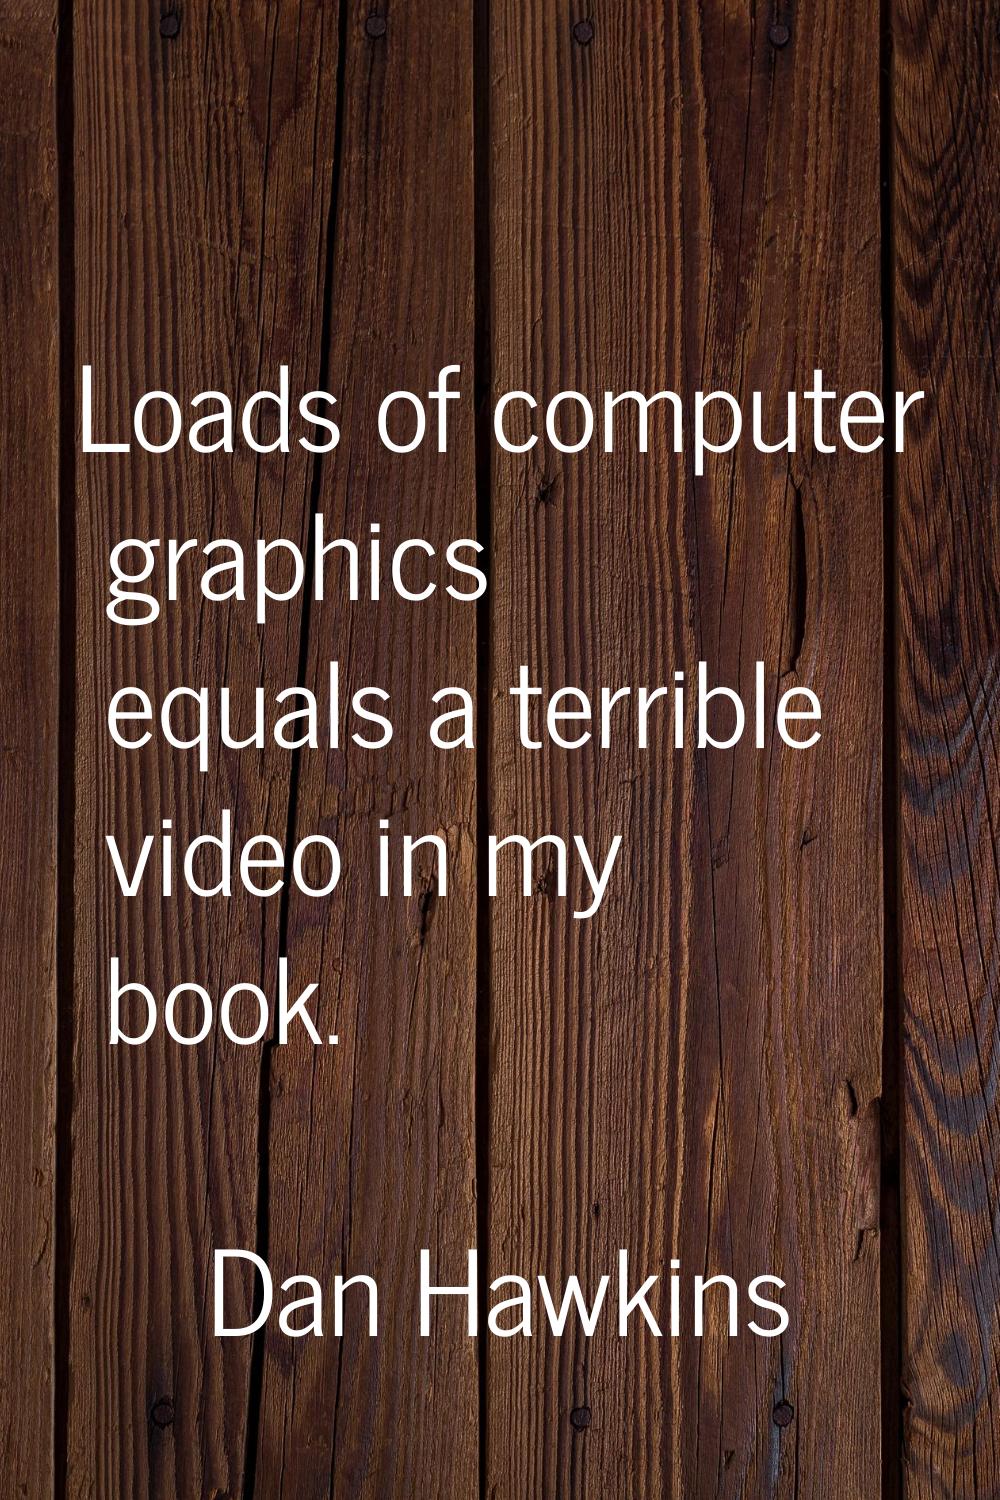 Loads of computer graphics equals a terrible video in my book.